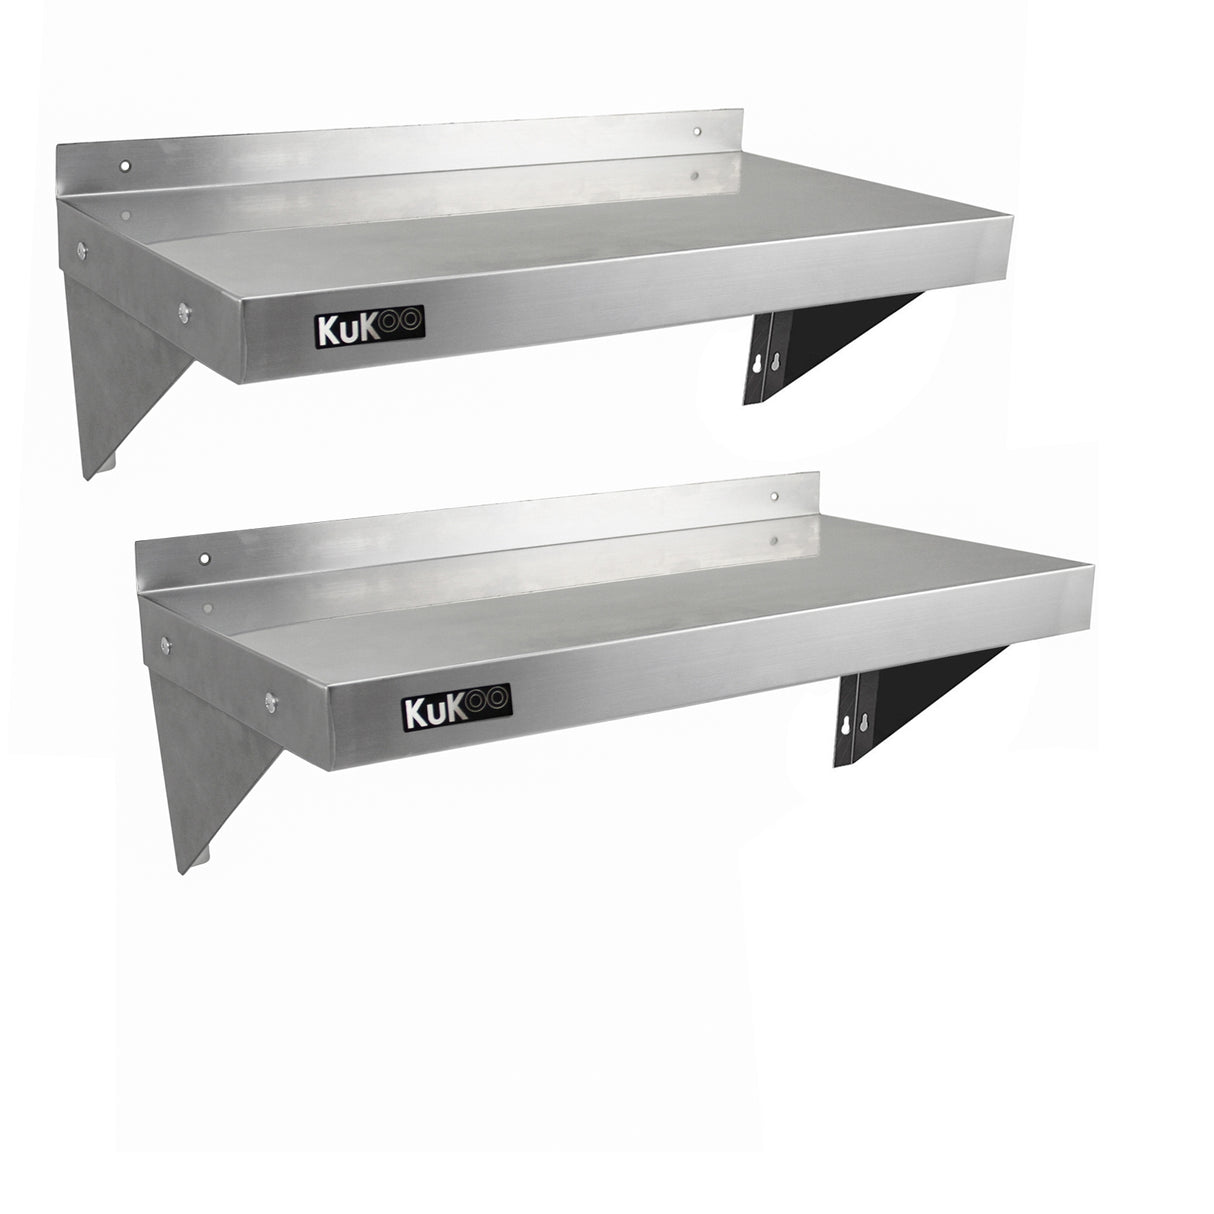 2 x KuKoo Stainless Steel Shelves 900mm x 300mm - Used - Acceptable